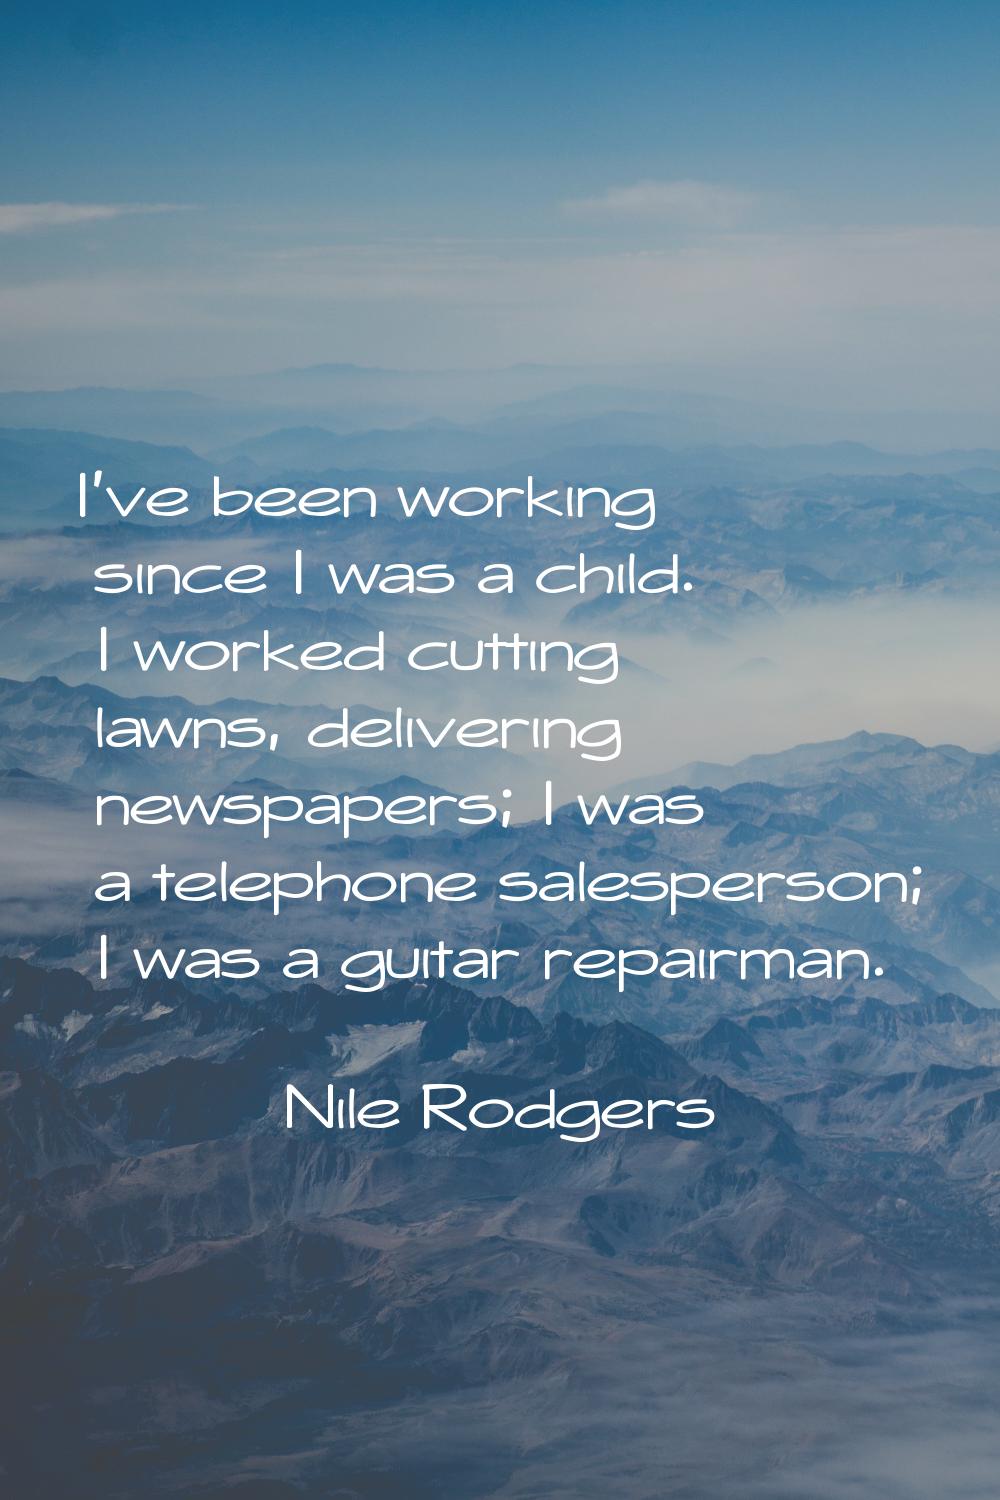 I've been working since I was a child. I worked cutting lawns, delivering newspapers; I was a telep